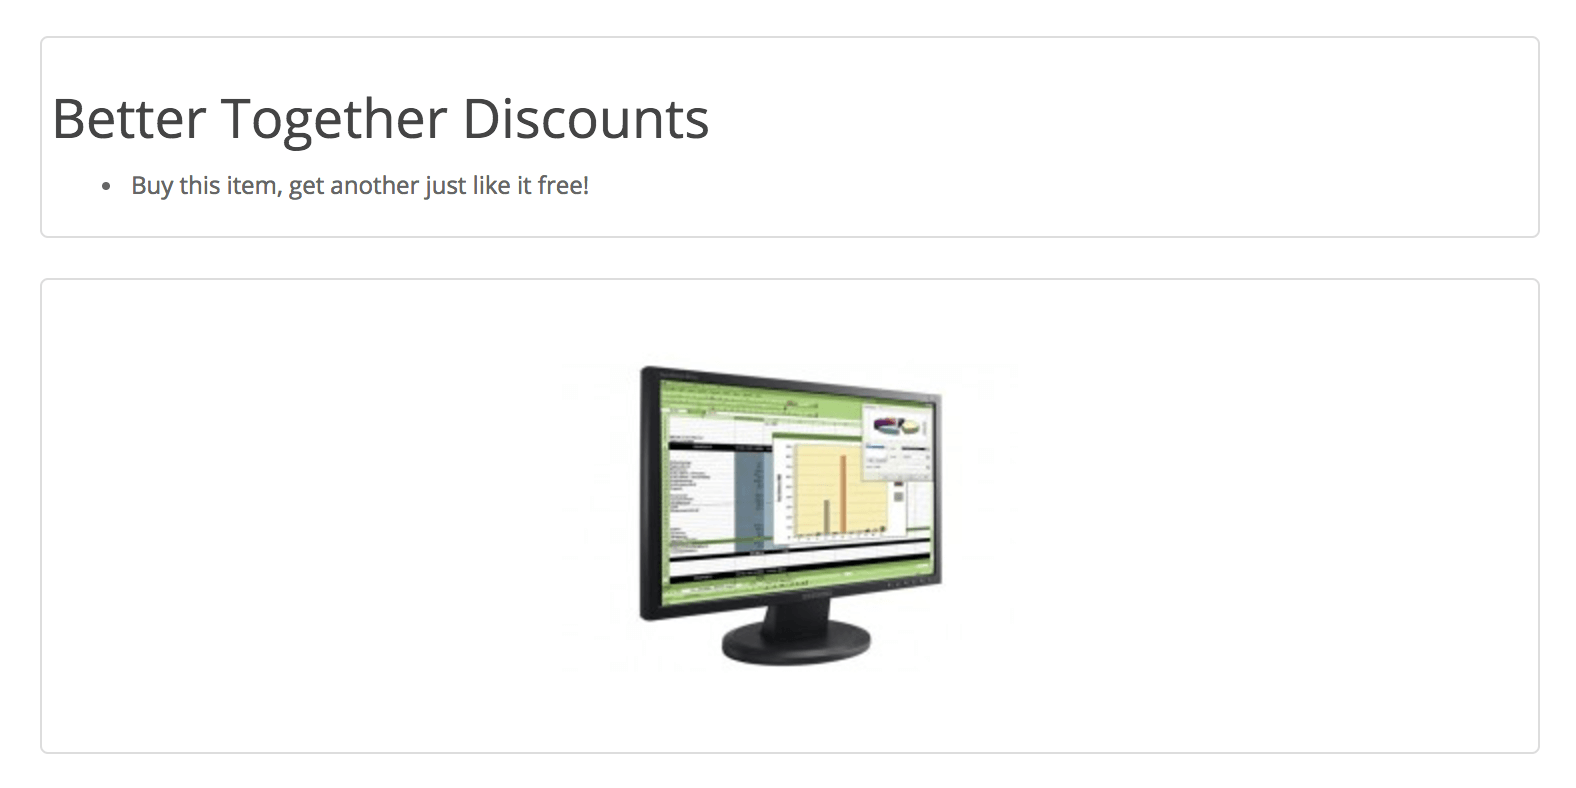 Product page showing Better Together discount